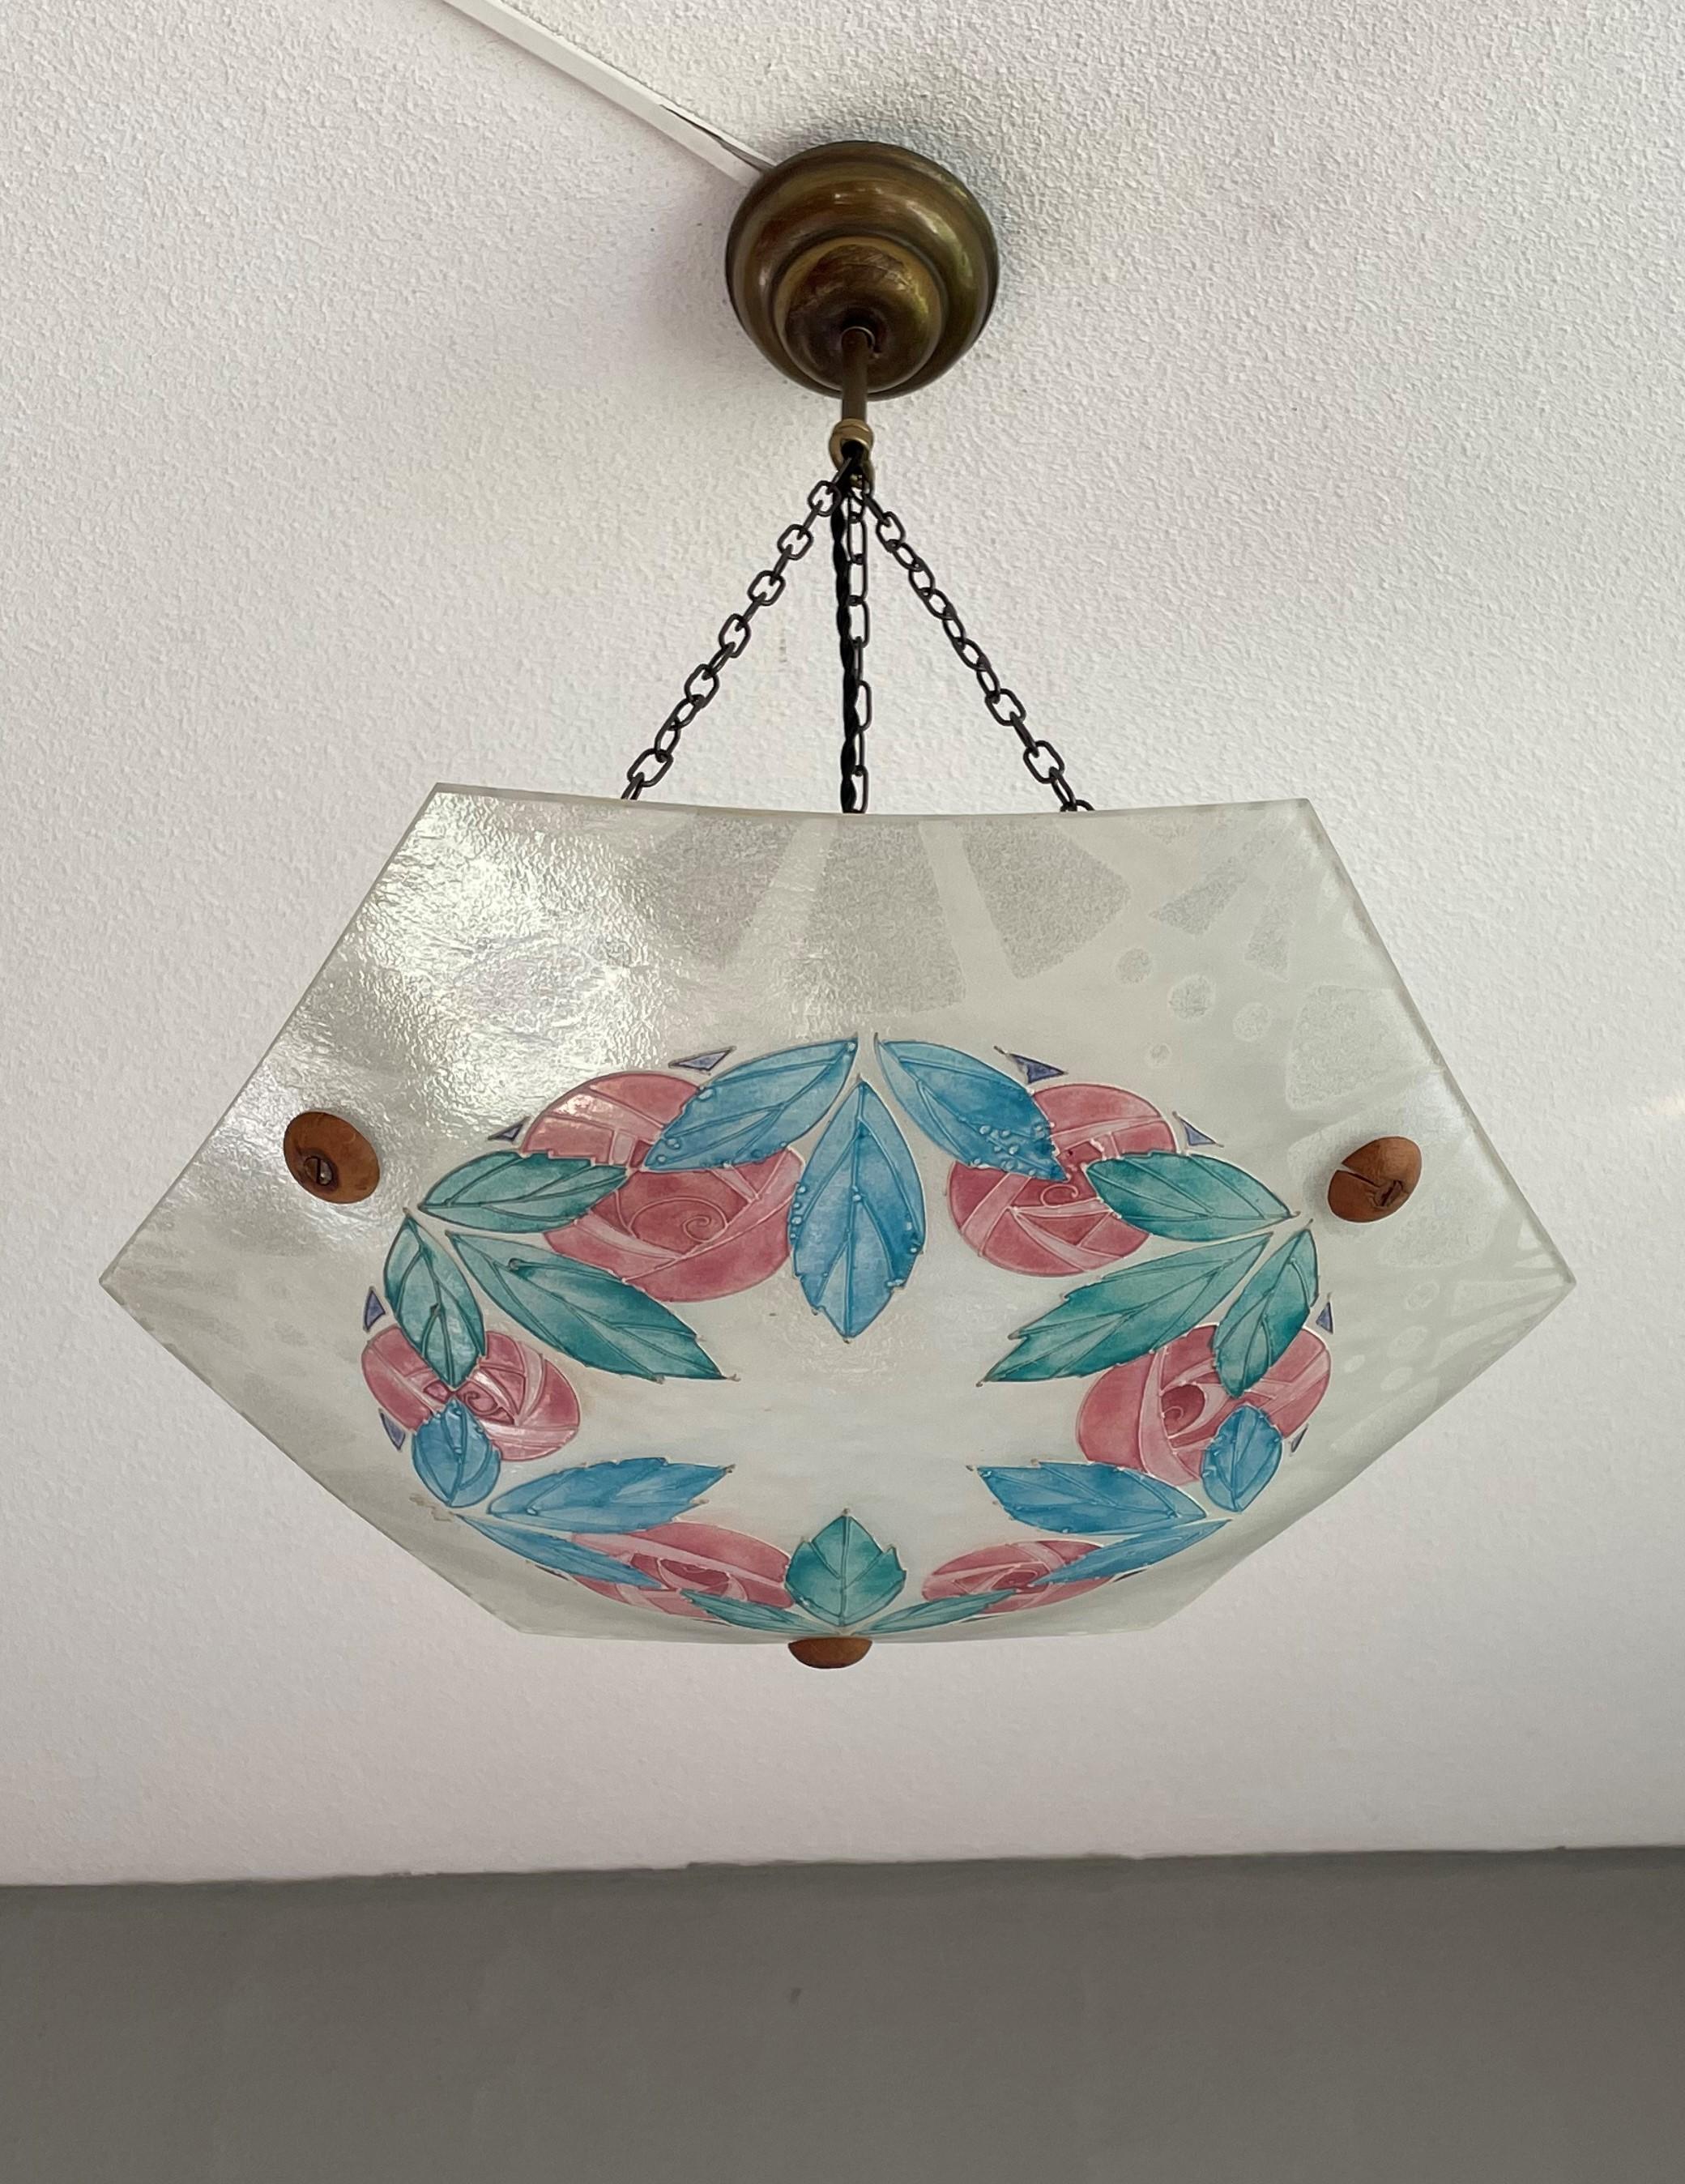 Stunning and stylish work of lighting art, signed B.M.

If you are passionate about early 20th century decorative art in general and roses (and what they stand for) in particular then this graceful pendant light could be flying your way soon. What